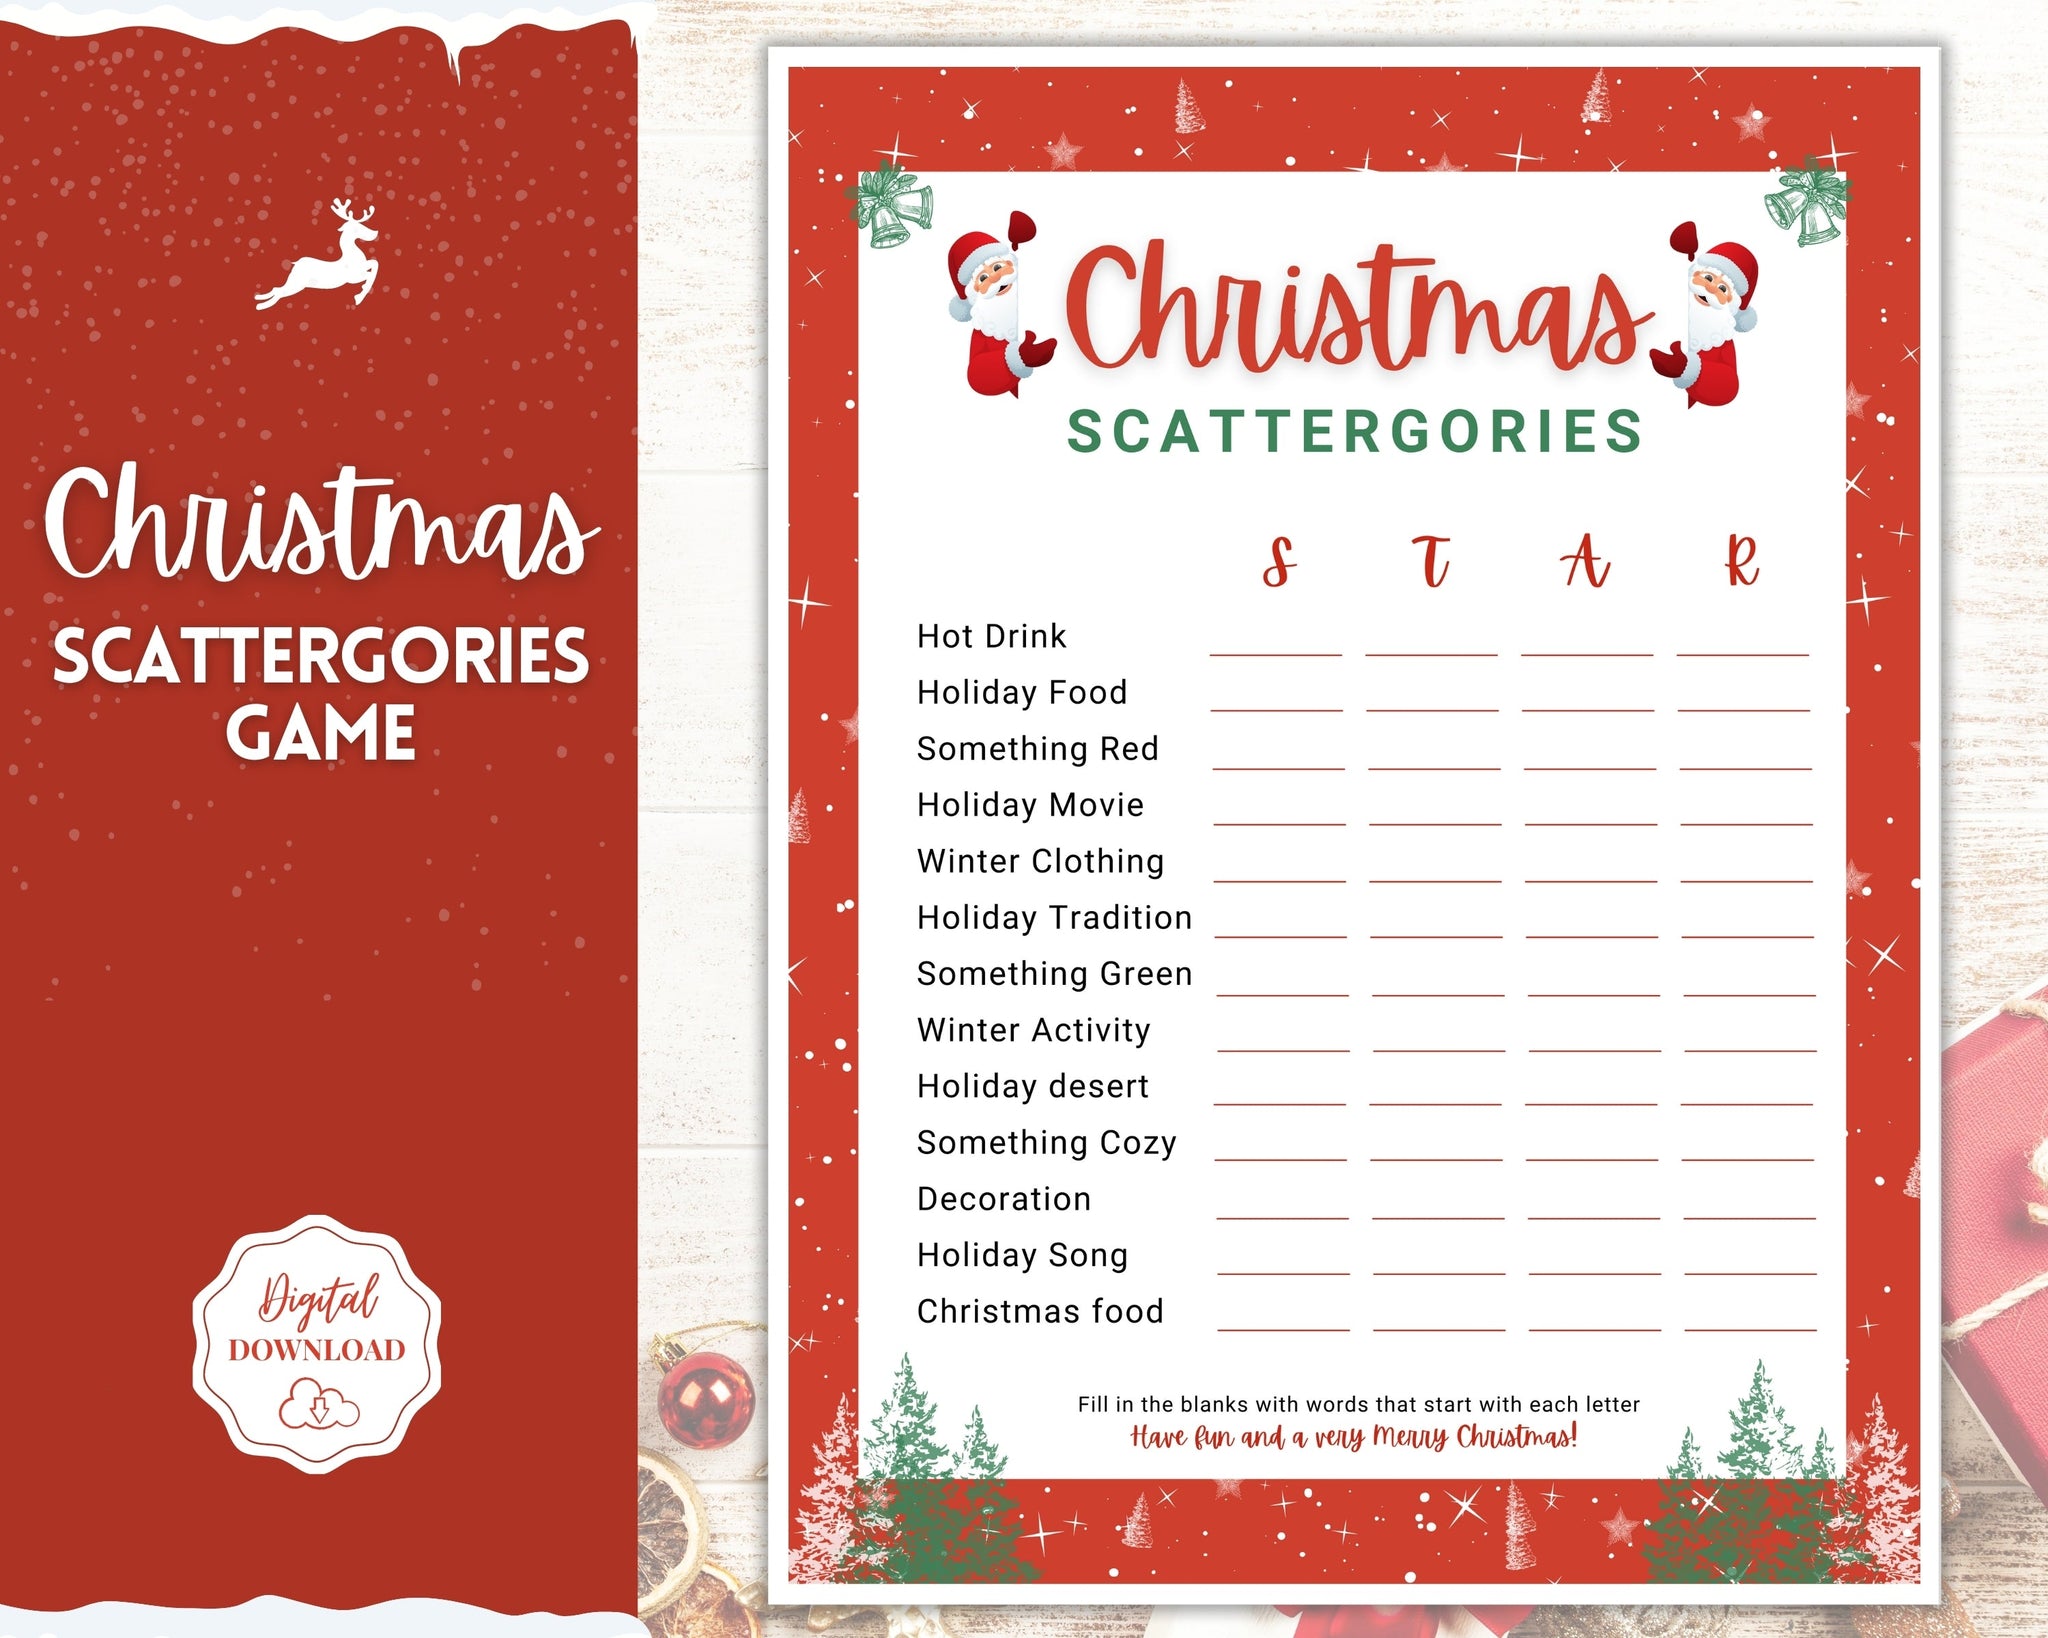 Christmas SCATTERGORIES Game | Xmas Holiday Game Party Printables